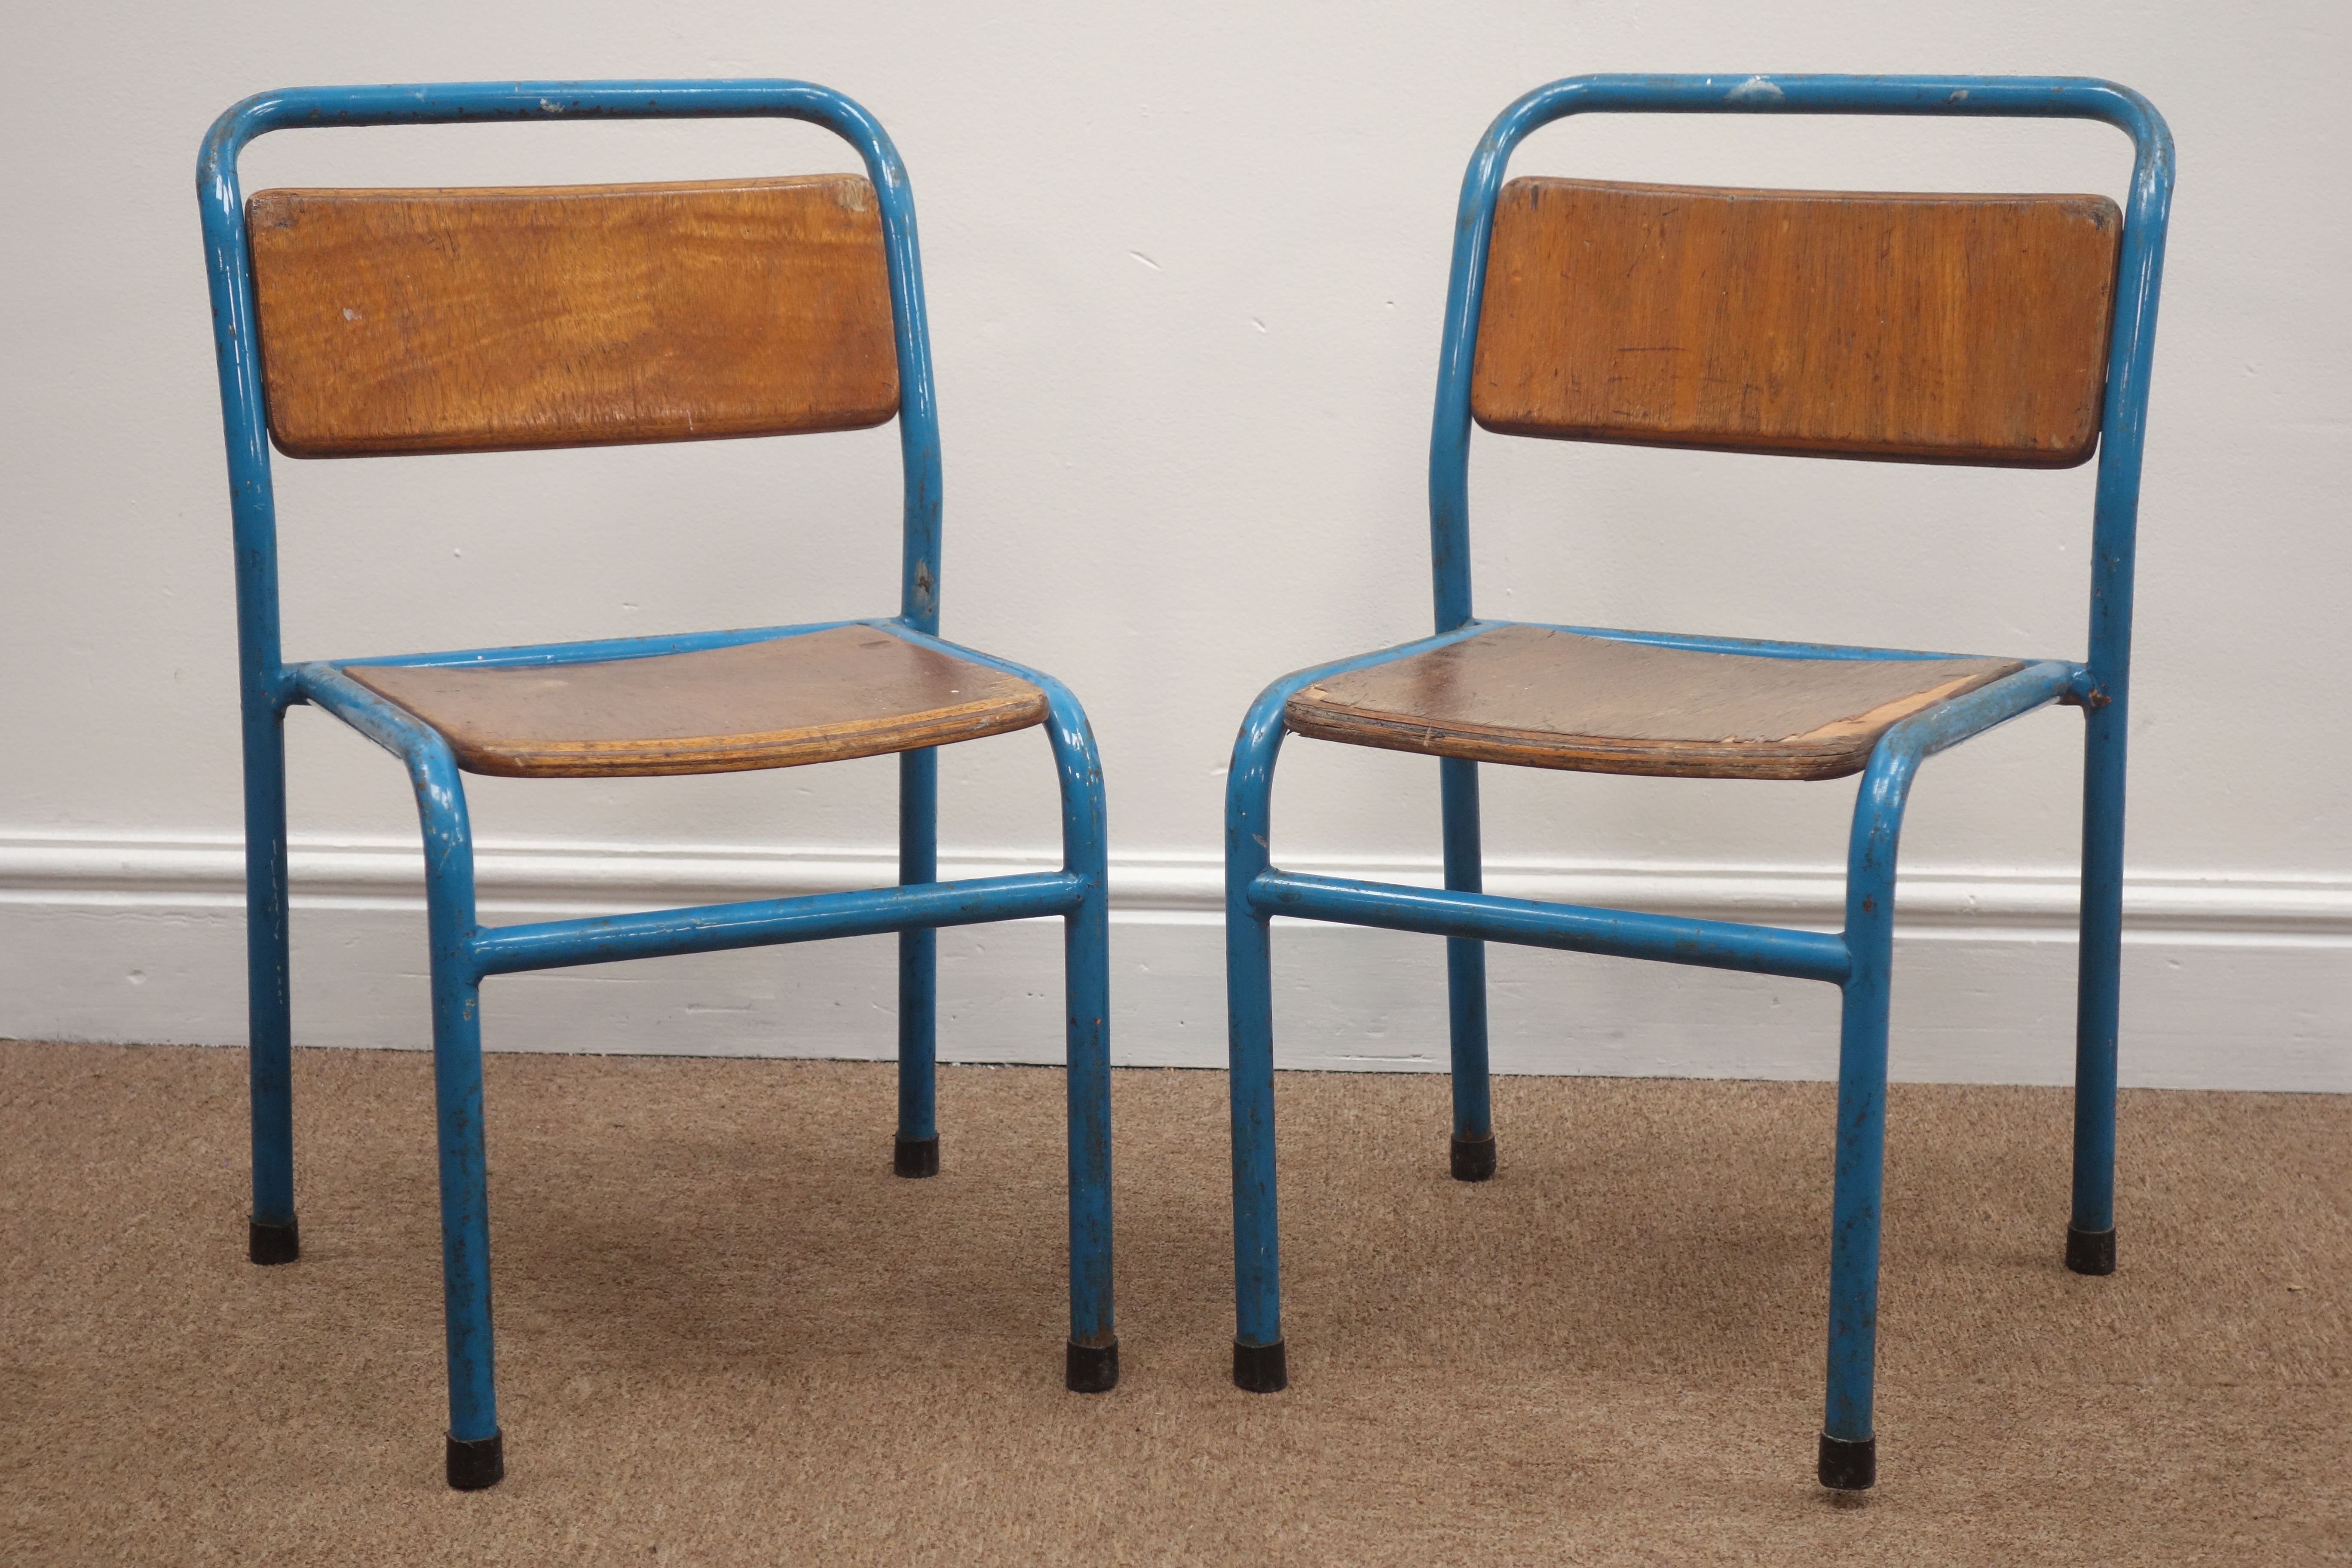 Pair of Vintage Child's school chairs, blue metal frames with laminate seats and backs, - Bild 2 aus 4